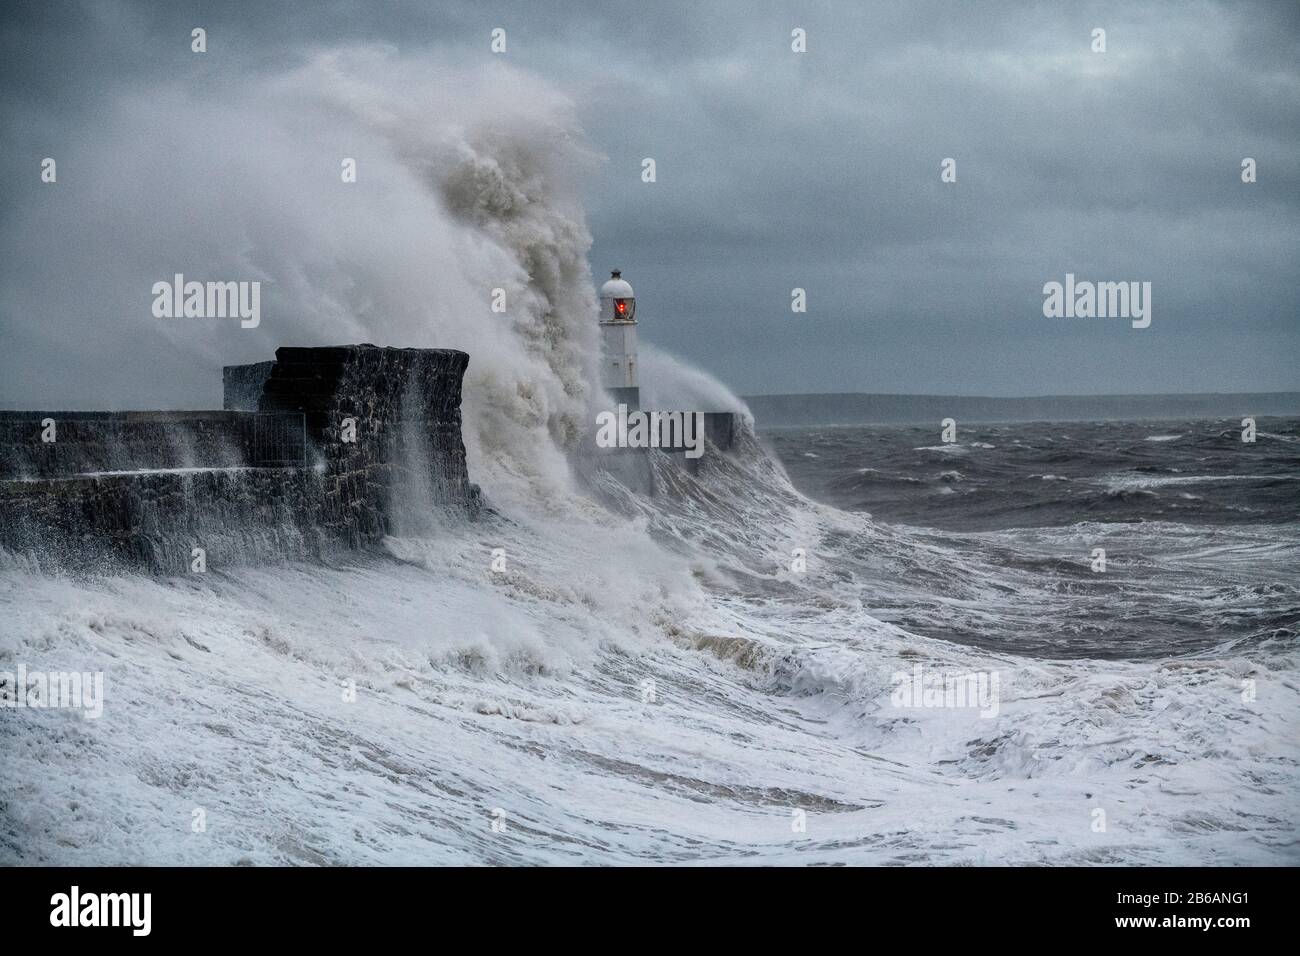 09.02.20. STORM CIARA. Waves crash over the breakwater and lighthouse at Porthcawl in South Wales as Storm Ciara hits the United Kingdom. Stock Photo